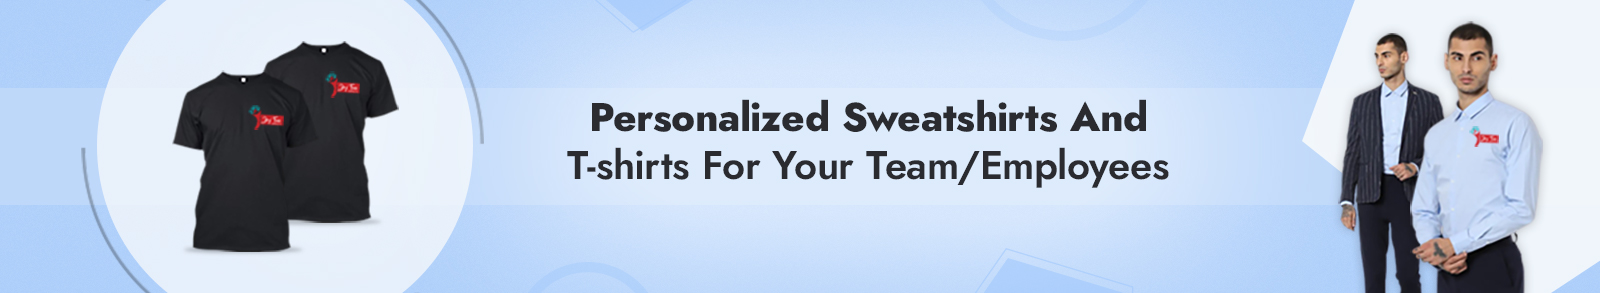 Personalized Sweatshirts And T-shirts For Your Team Employees